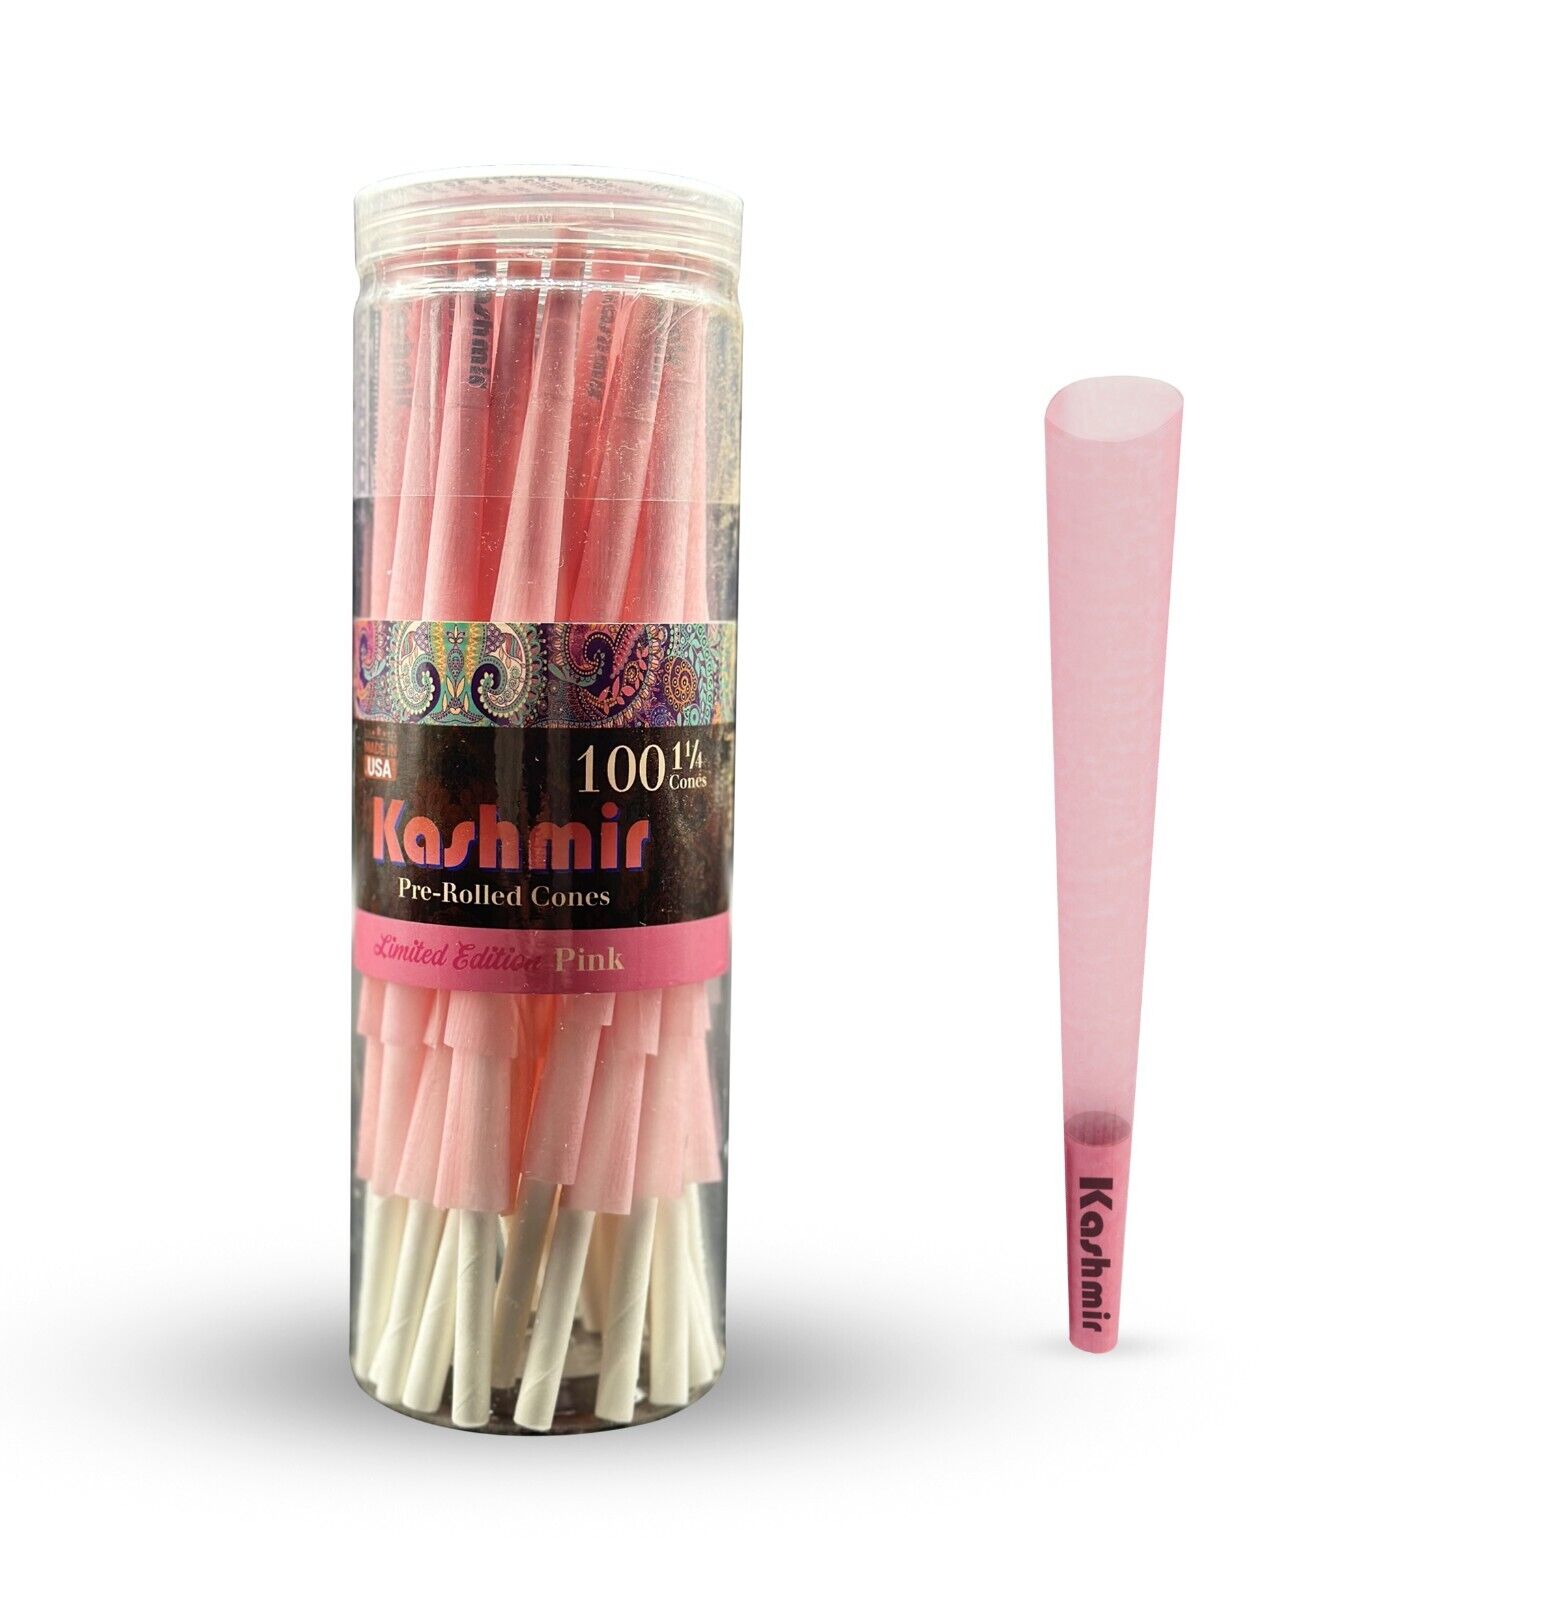 Kashmir Pre Rolled Cones Pink Natural Rolling Papers Cones 1-1/4 100 Ct Jar